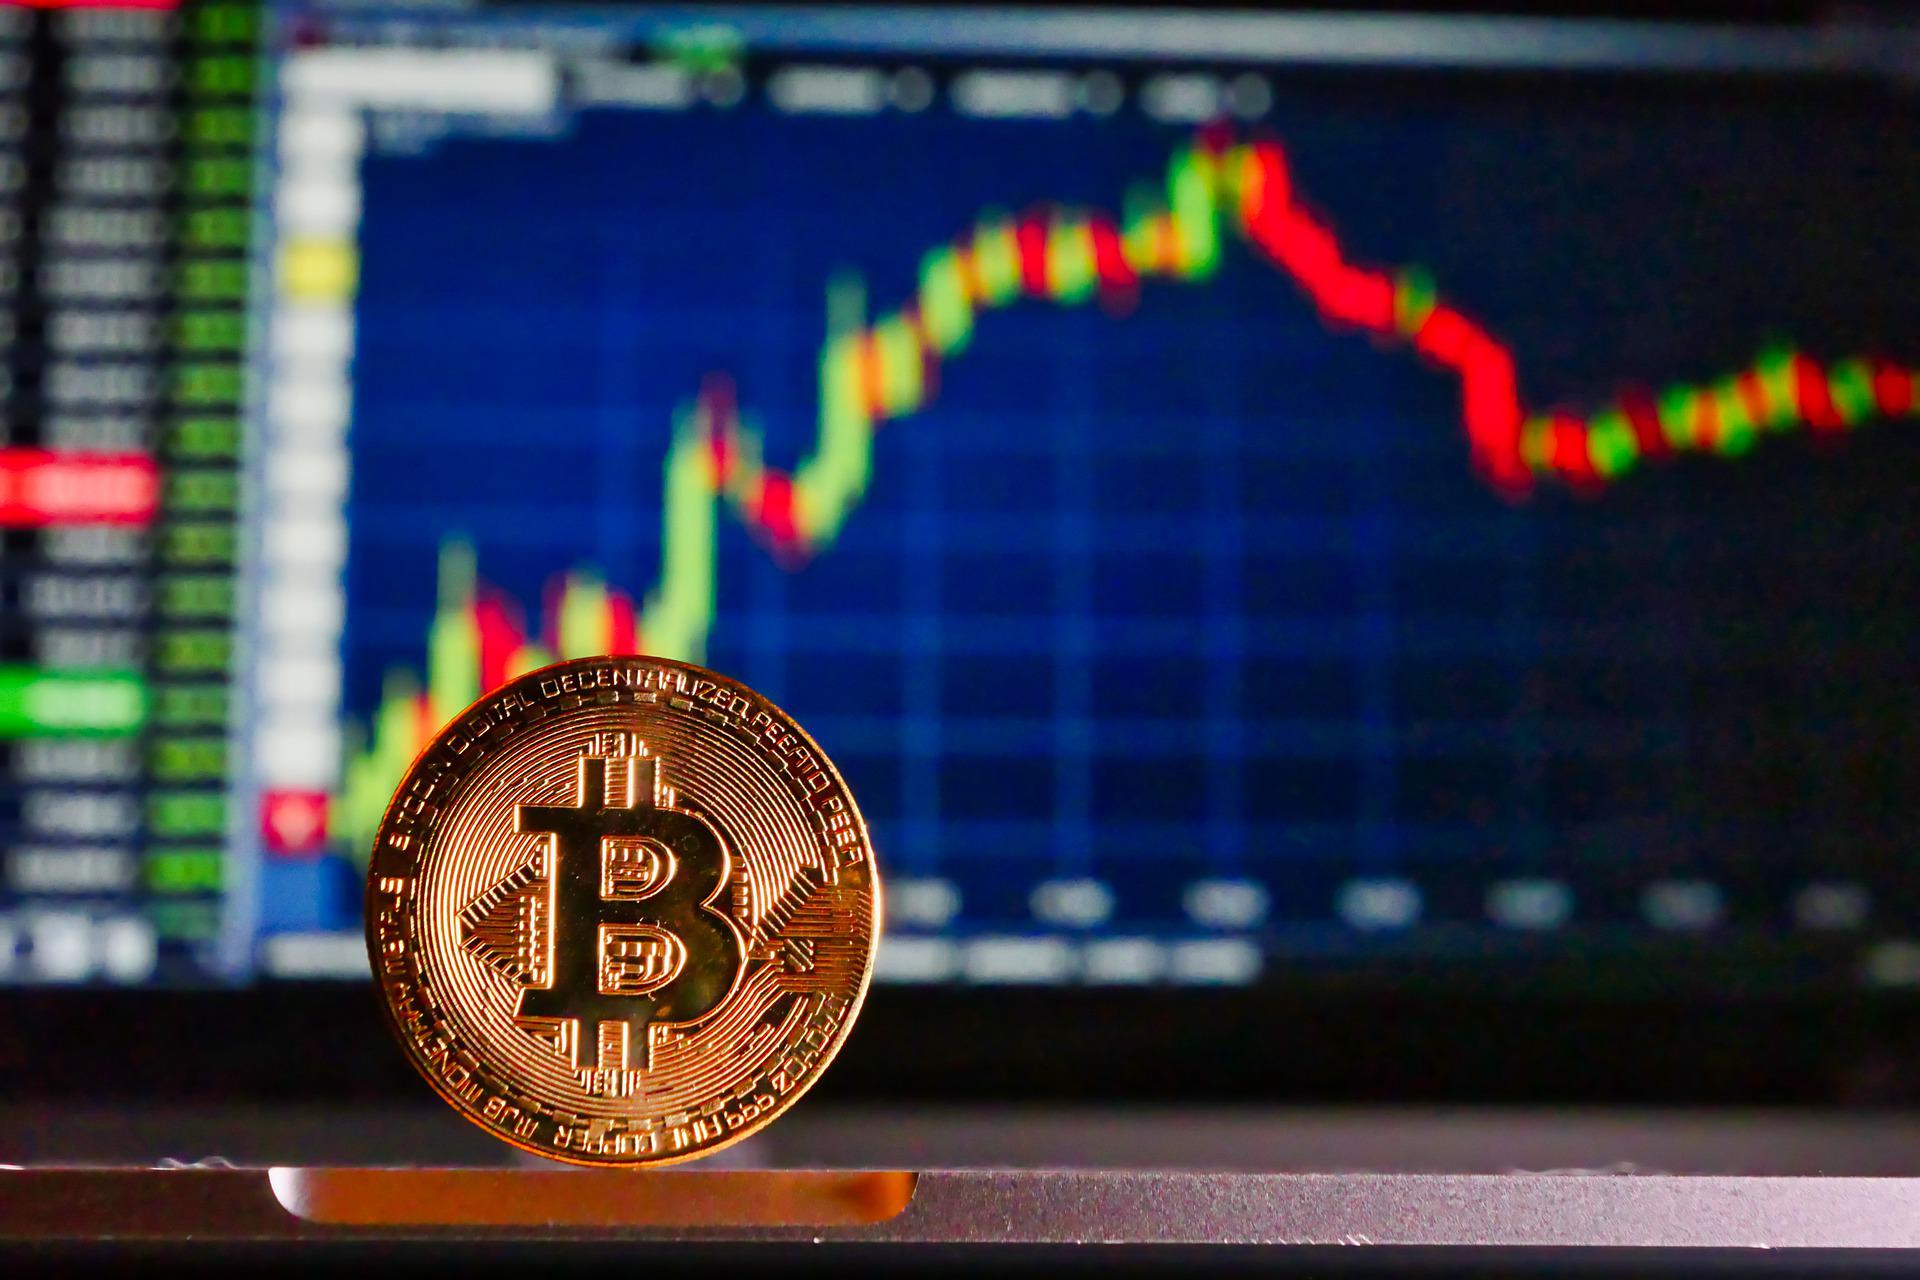 Appetite for wealth managers to offer crypto services - research